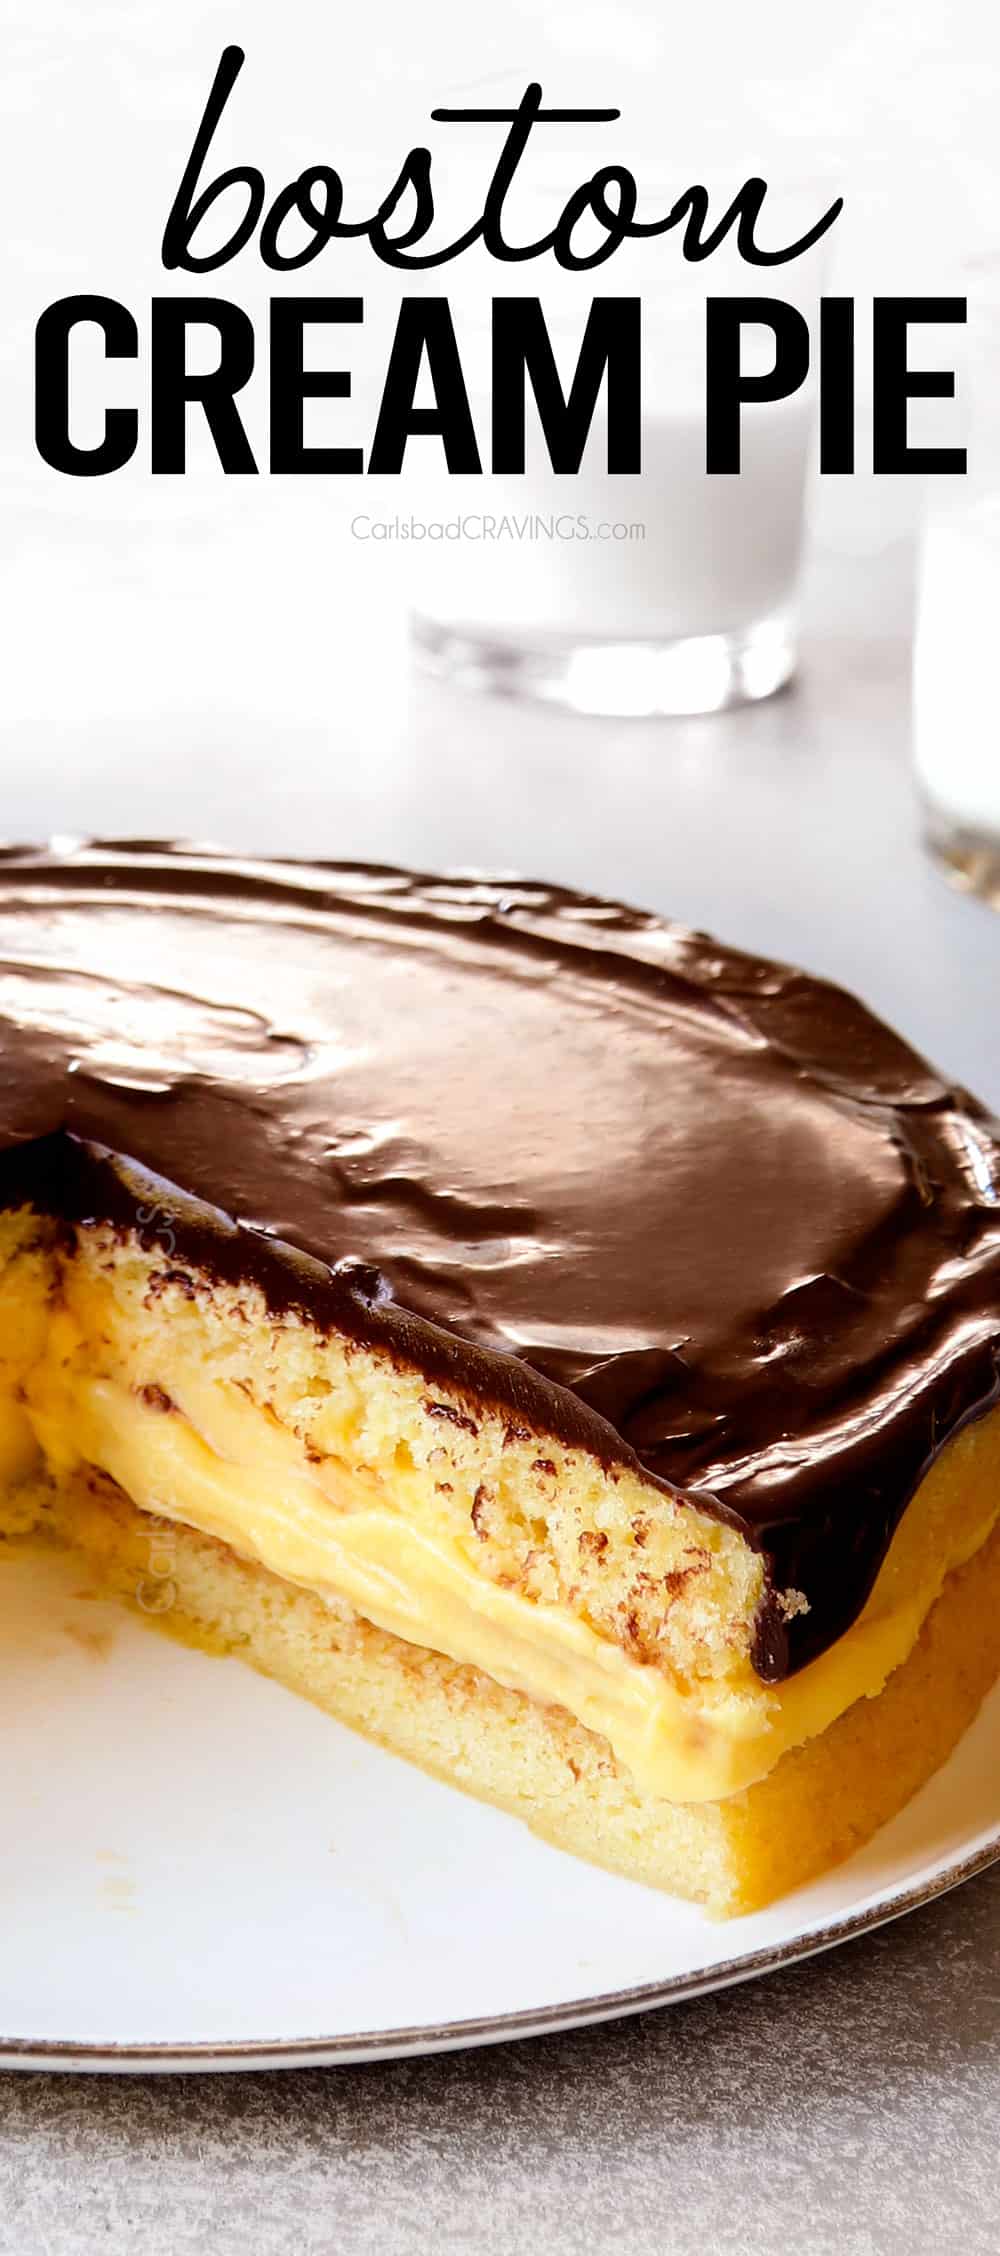 up close of Boston Cream Pie with slices missing showing how fluffy the cake is